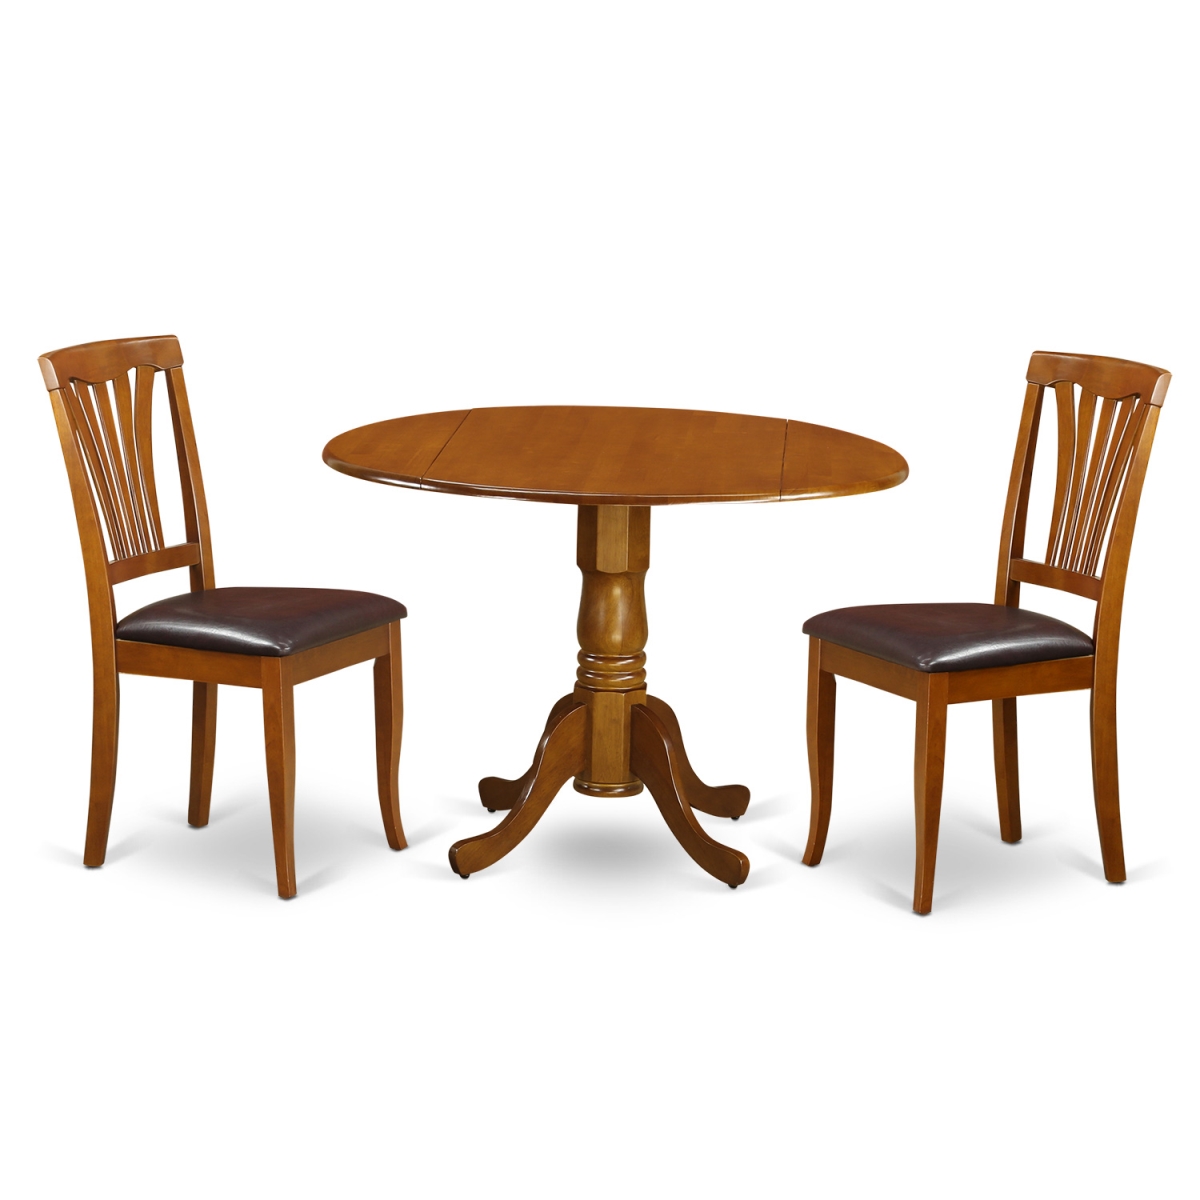 GSI Homestyles Dublin Kitchen Table Set - Dining Table & 2 Faux Leather Chairs - 3 Piece